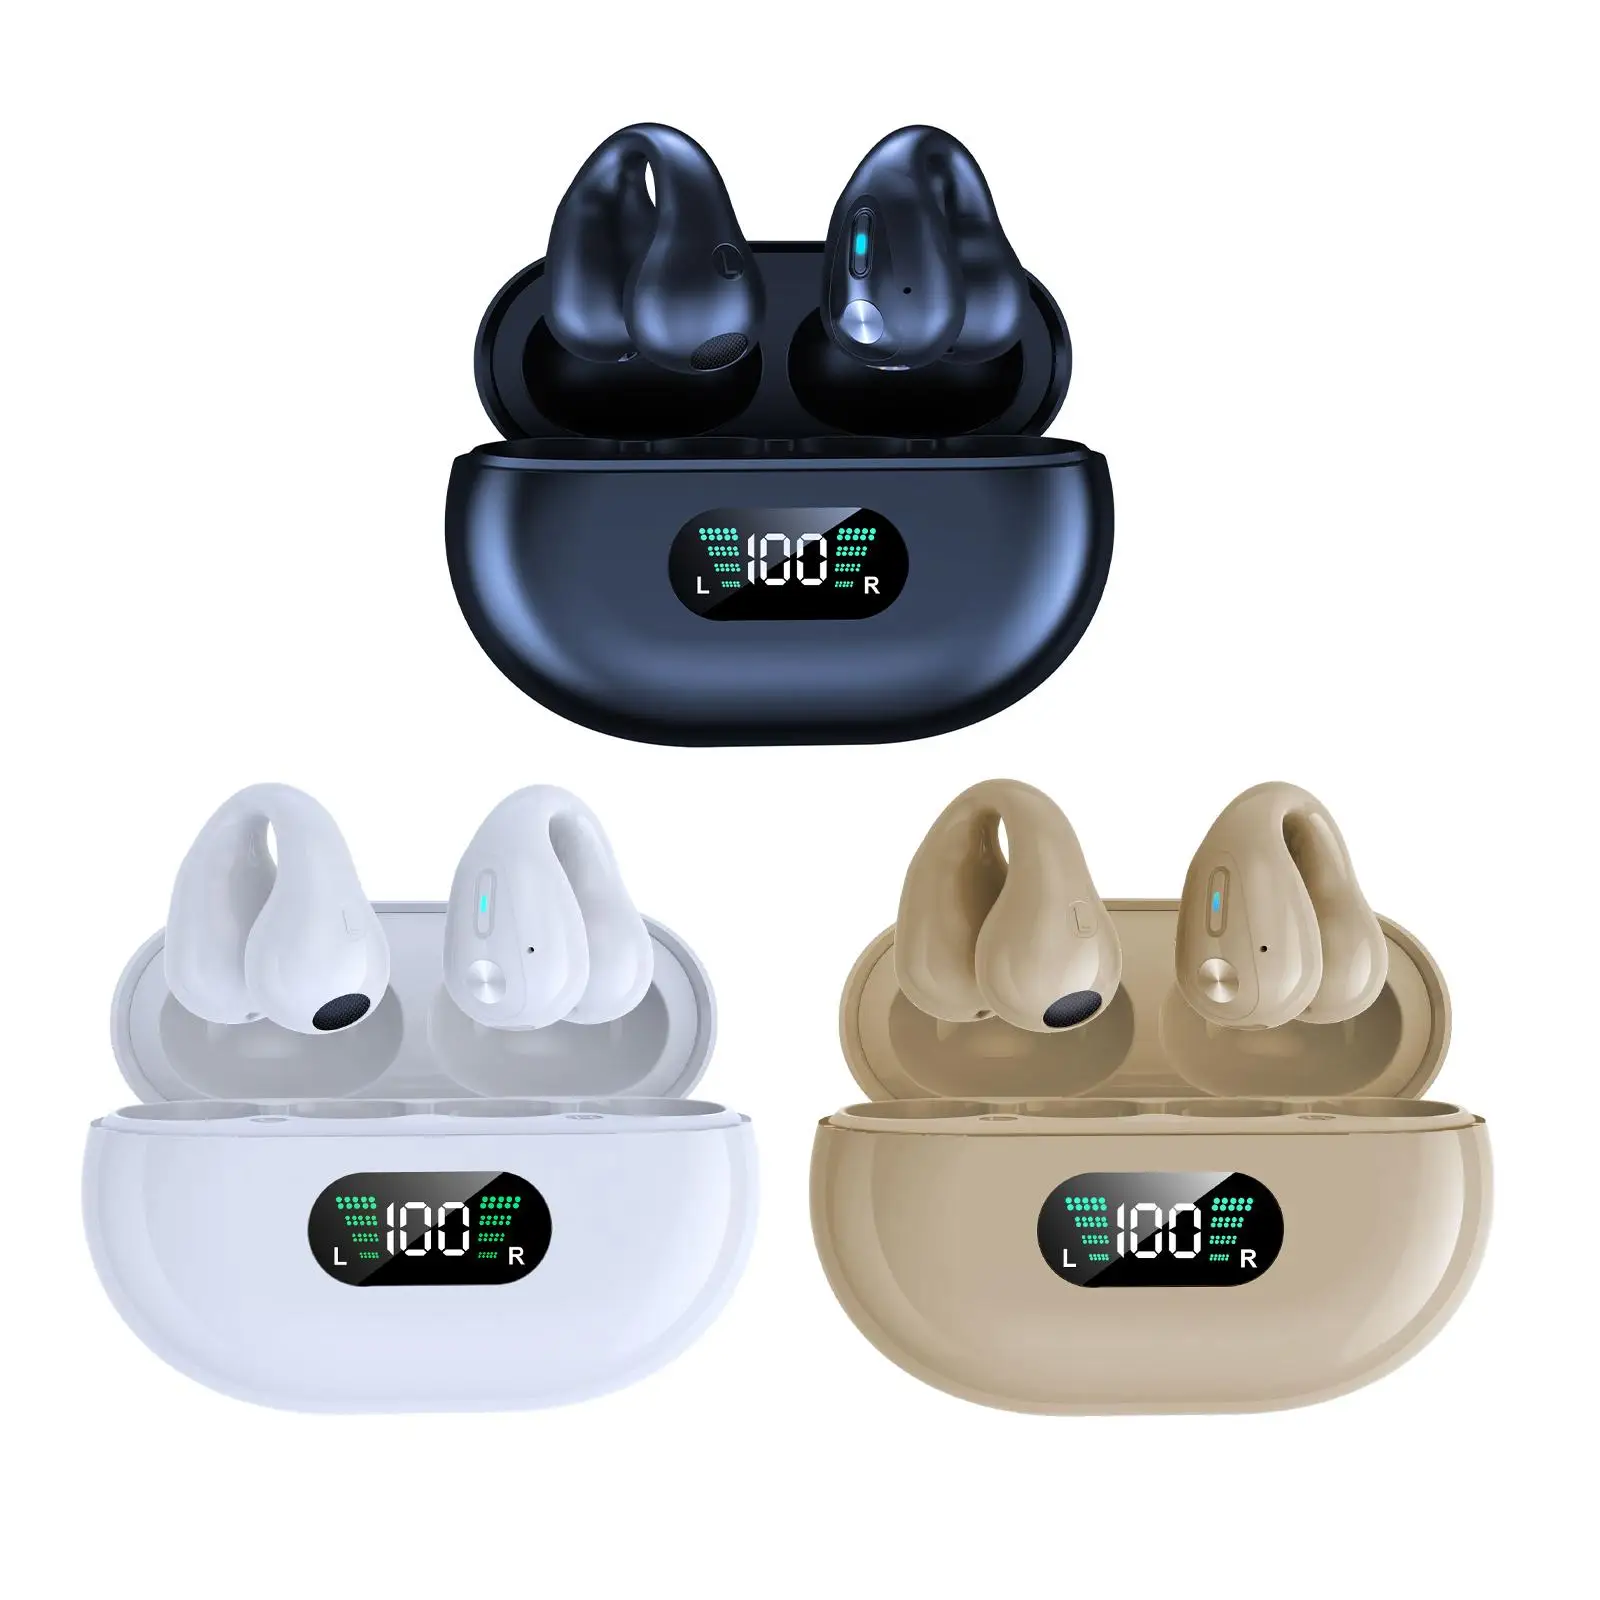 Auto Pairing Ear Clip Headphones Noise Cancelling Built in Mic HiFi Stereo Handsfree Calling Headsets for Running Sports Gym